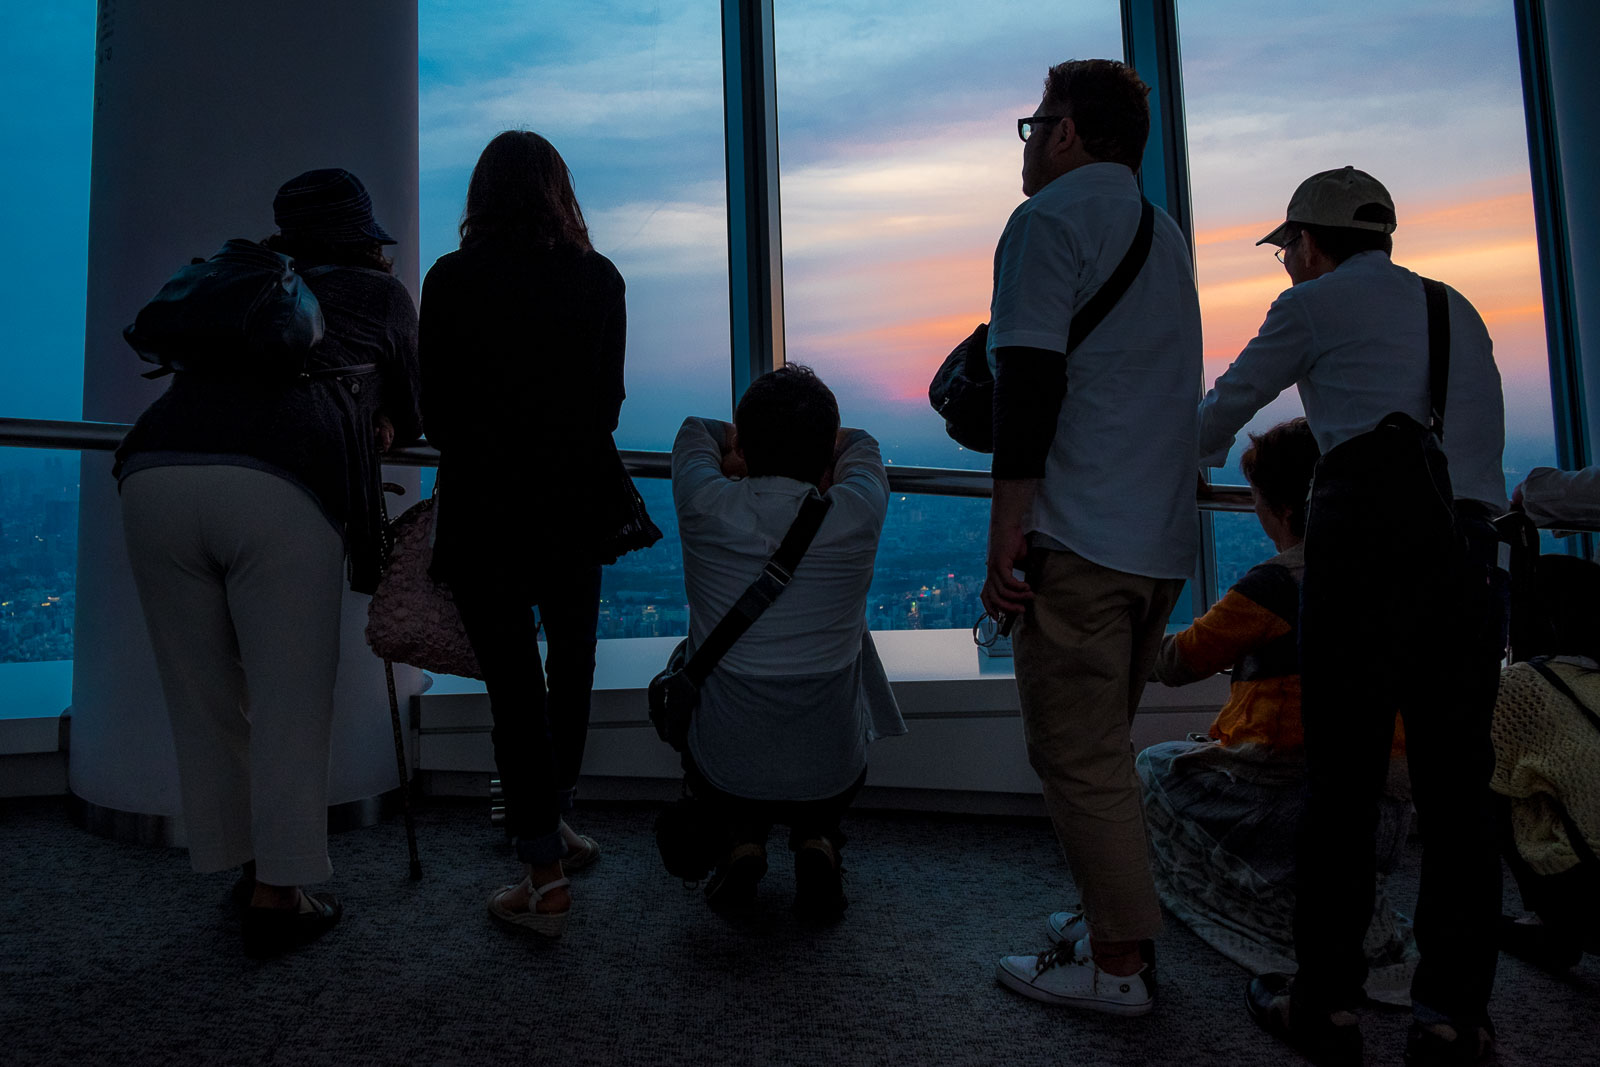 Visitors watching the sunset on the Skyetree oberservation deck